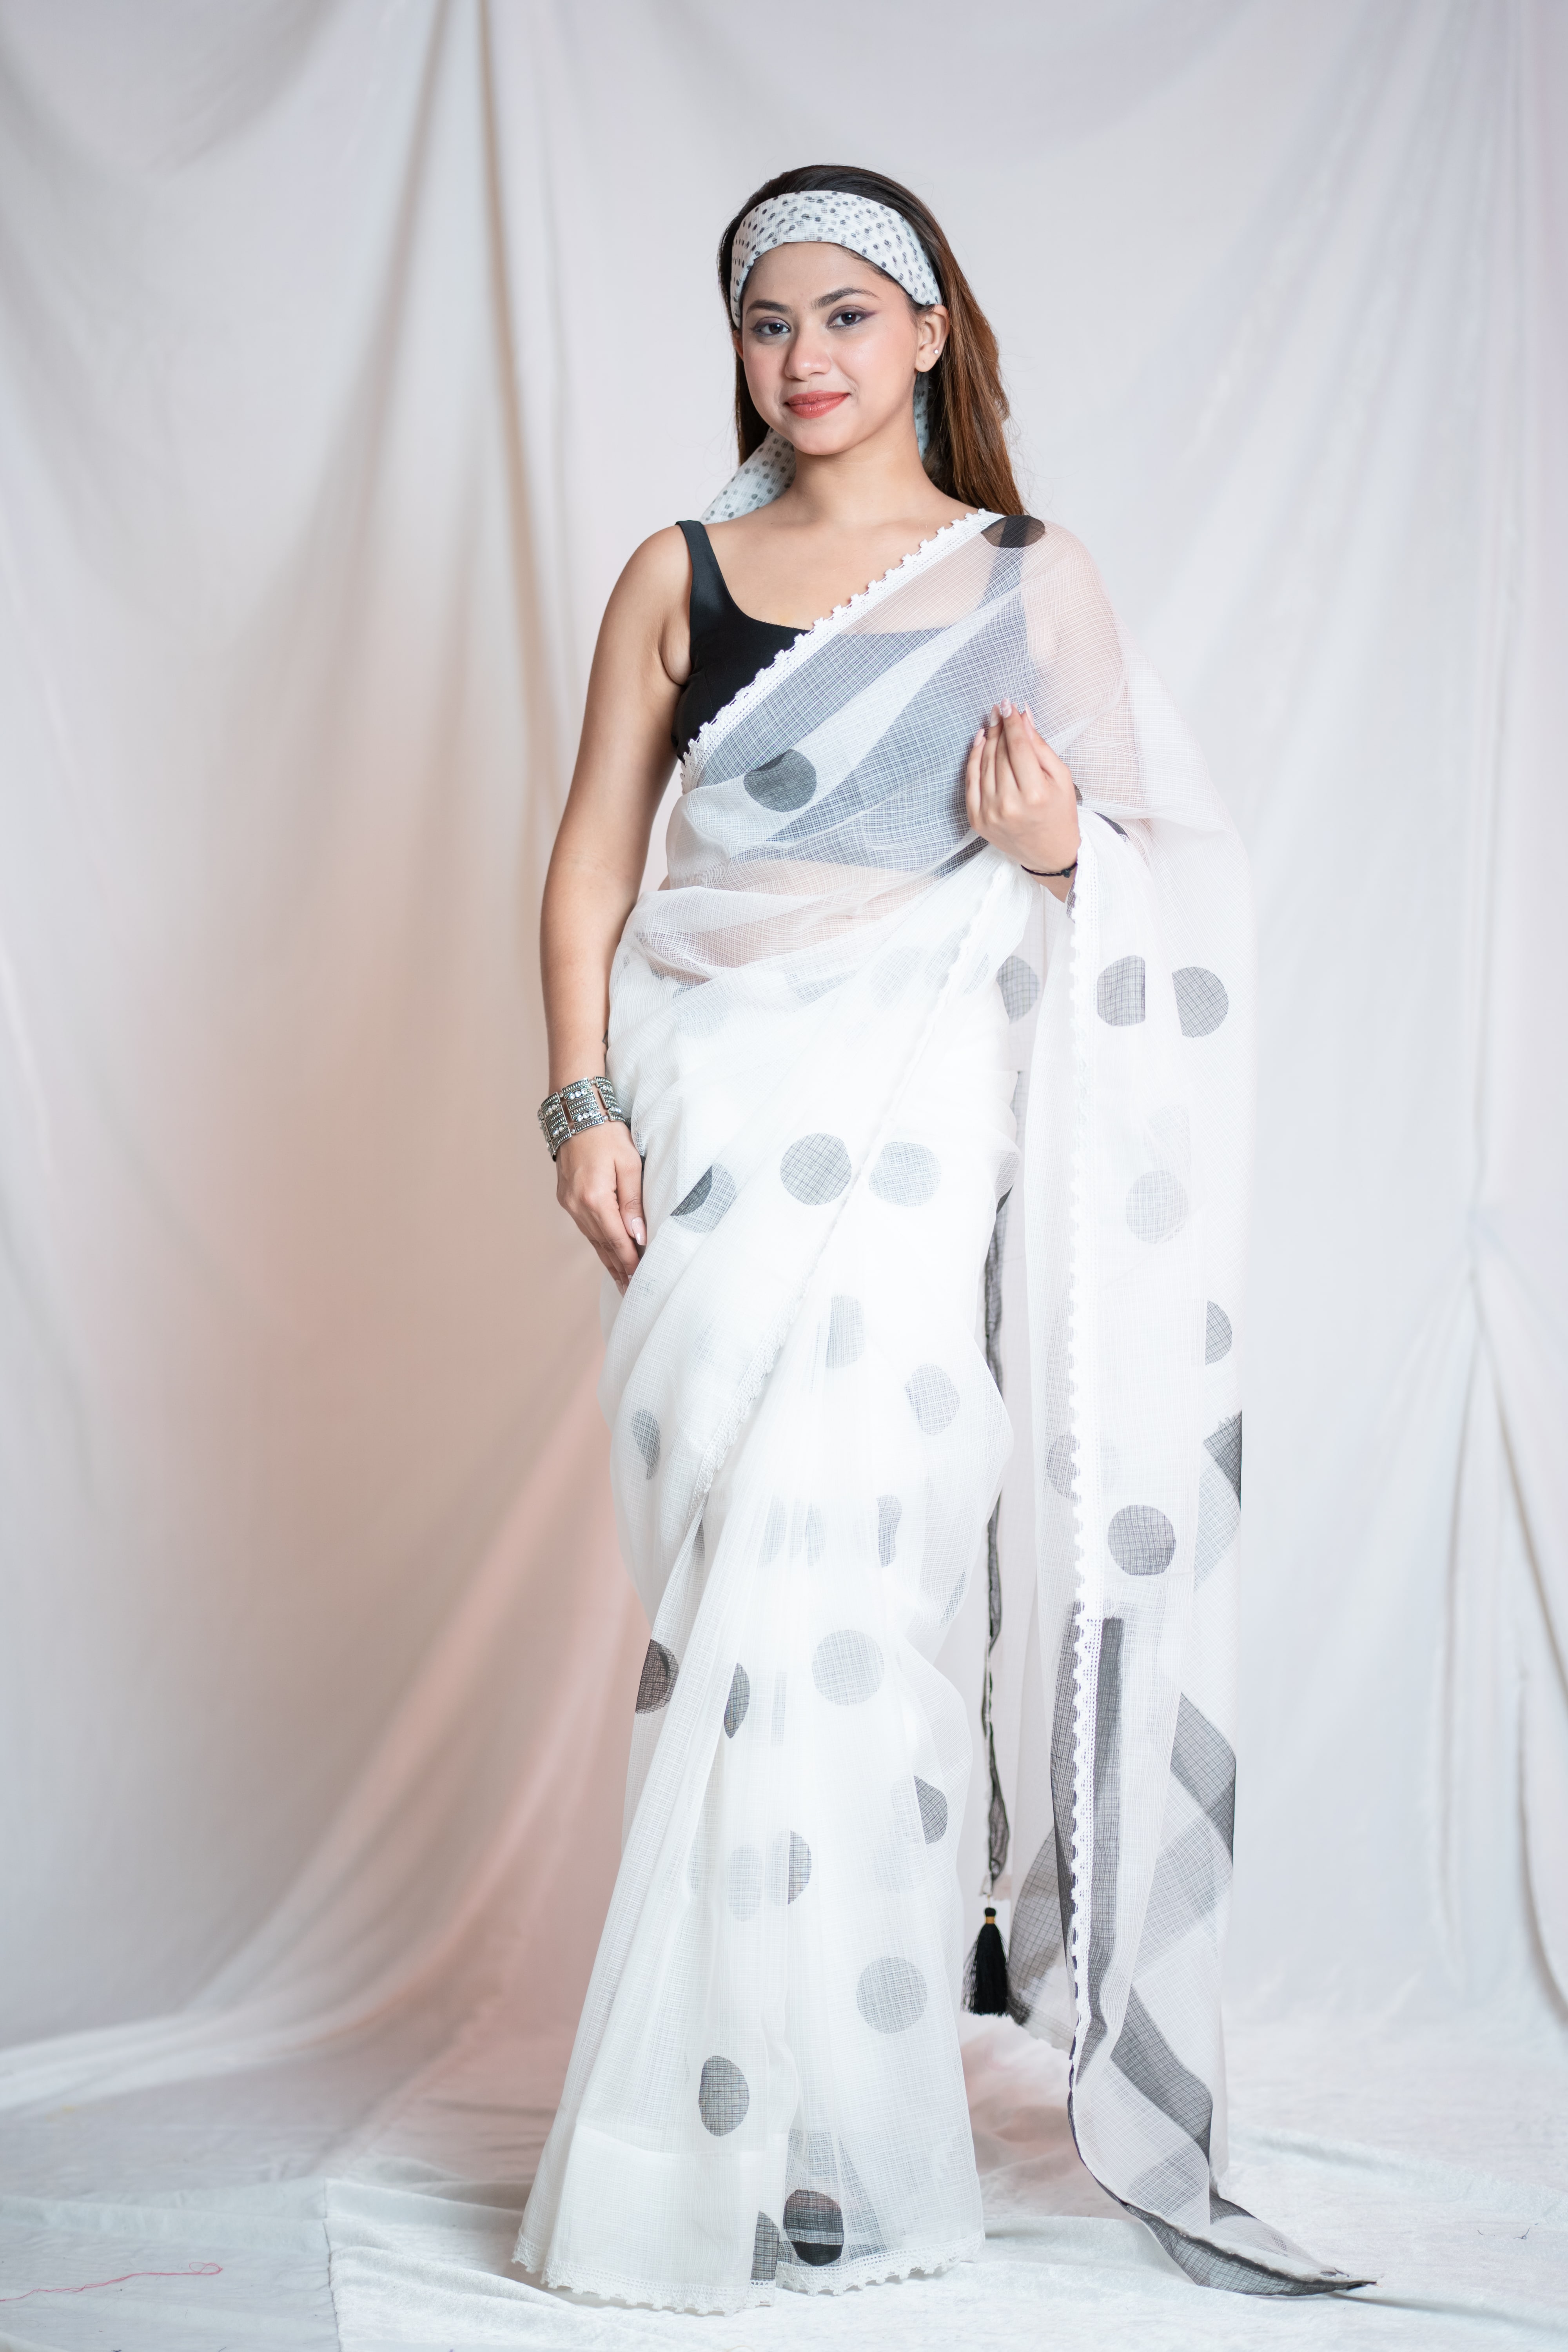 White Kota Doria saree with black polka dots, featuring a lightweight, sheer fabric with a subtle sheen. The saree is draped elegantly, showcasing its fine texture and delicate pattern